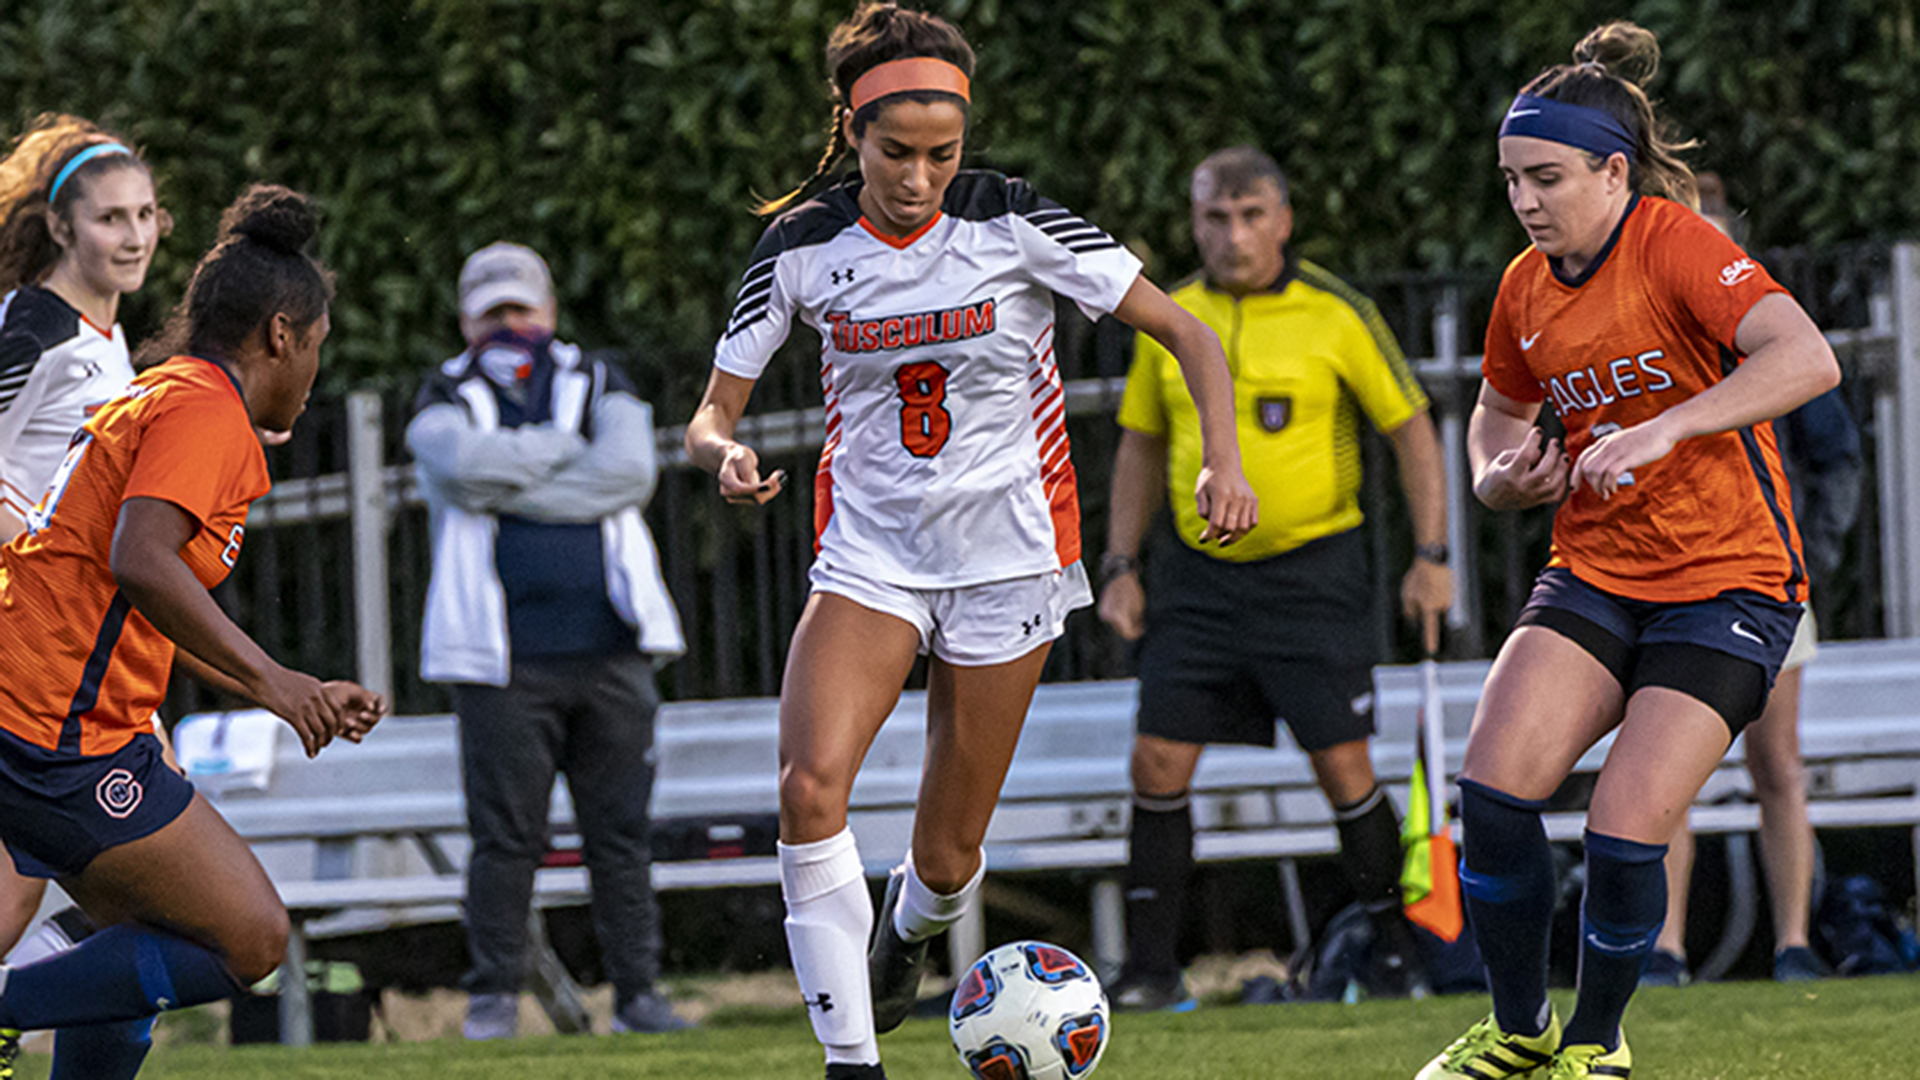 Overtime goal gives Carson-Newman rainy 3-2 win over Pioneers